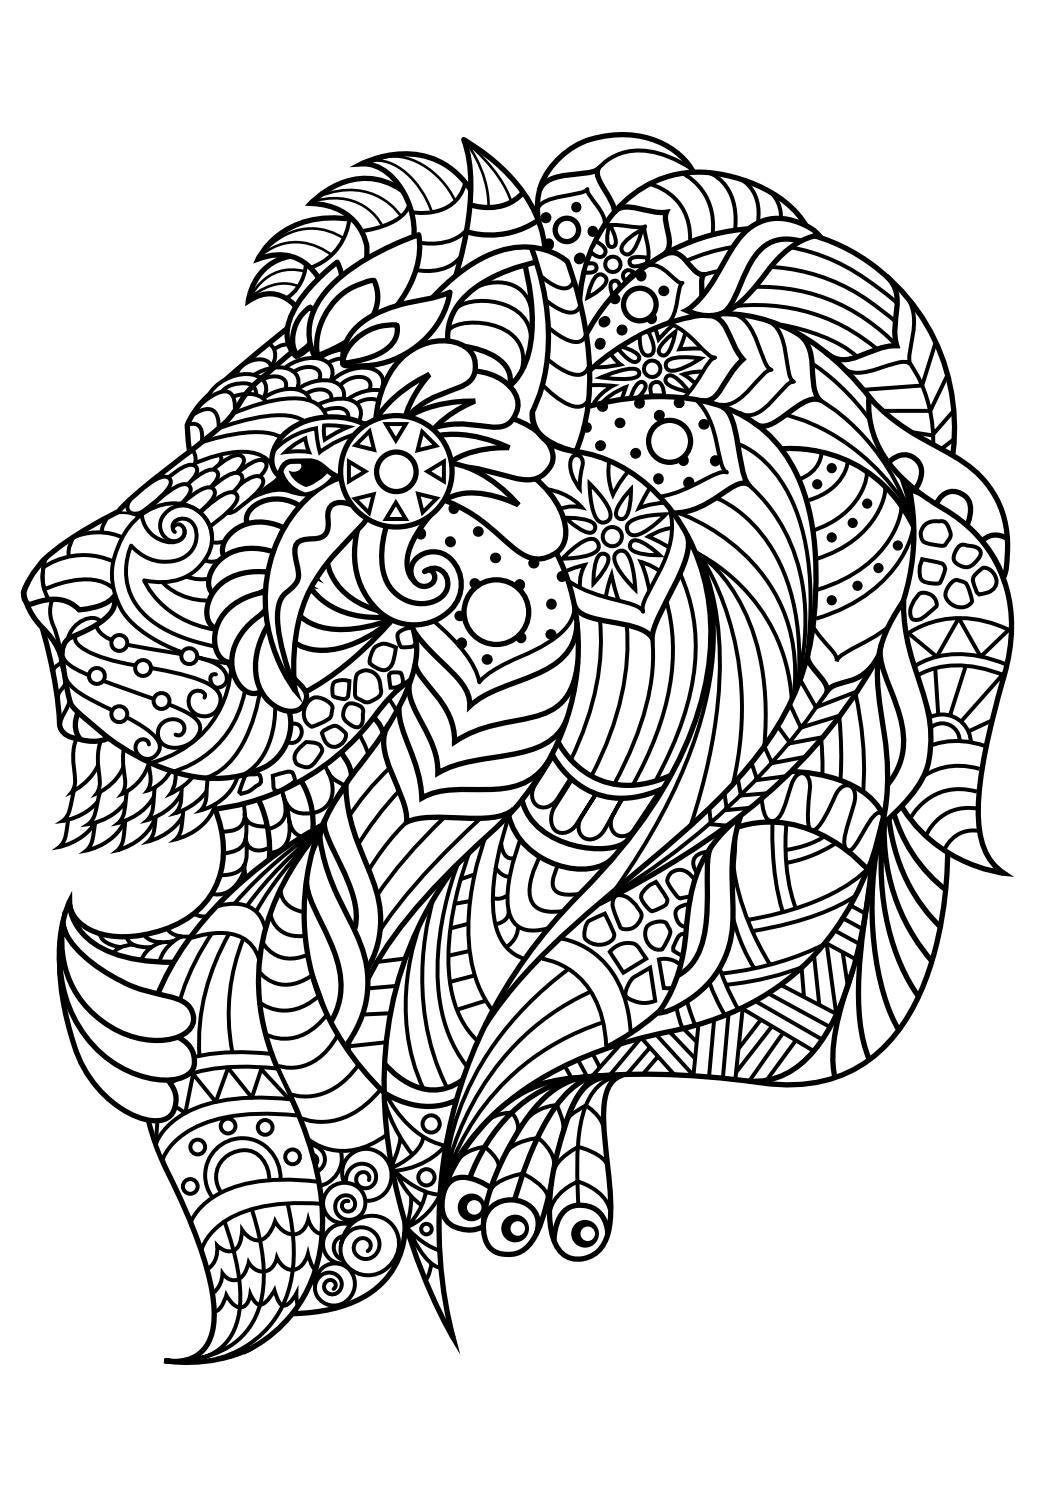 Animals Coloring Pages For Adults
 Animal coloring pages pdf